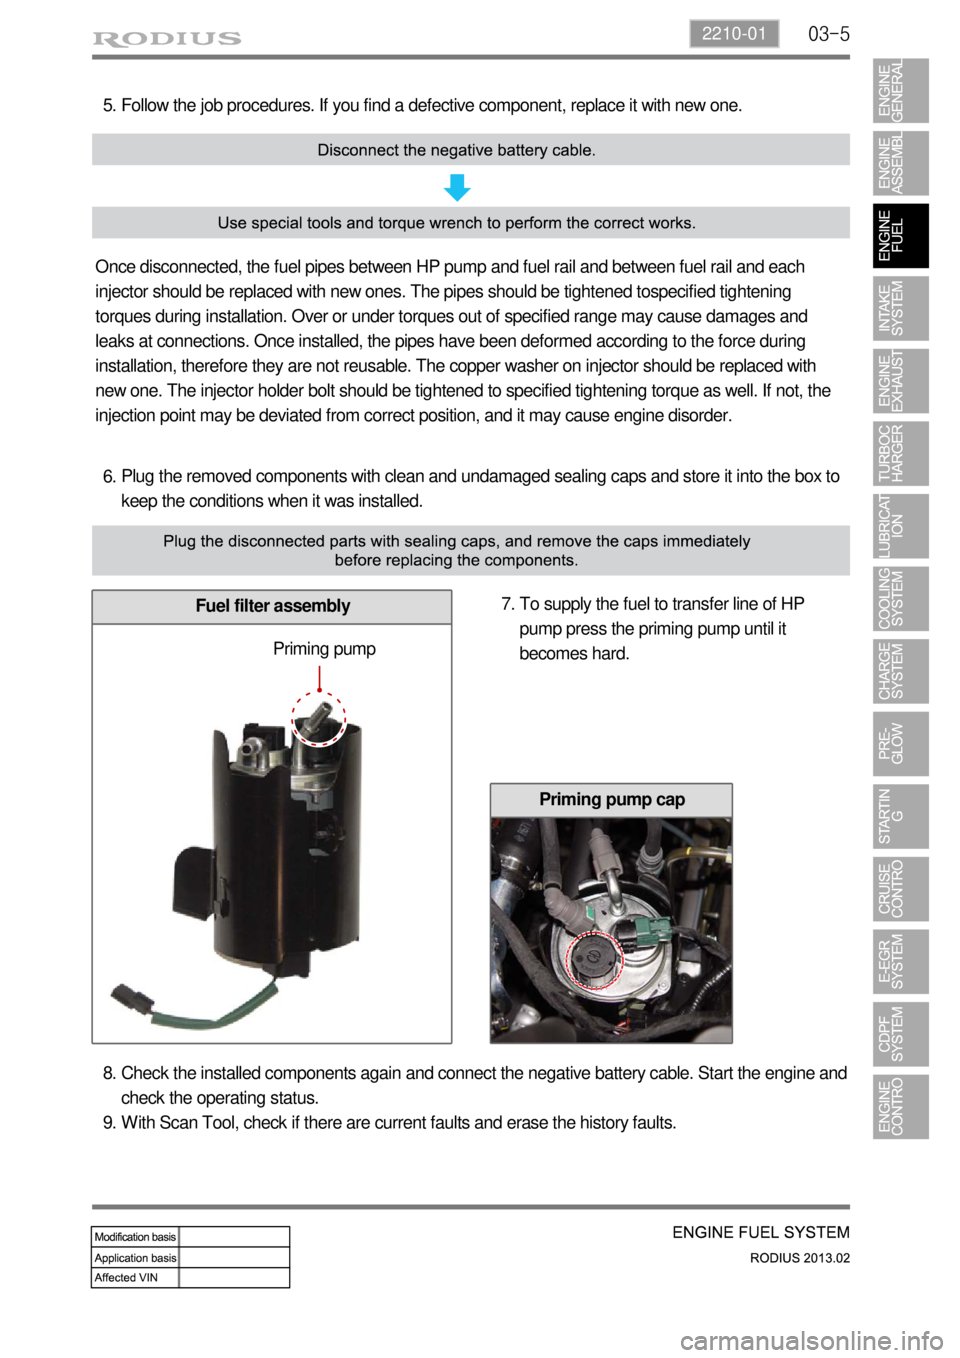 SSANGYONG TURISMO 2013  Service Manual 03-52210-01
Plug the removed components with clean and undamaged sealing caps and store it into the box to 
keep the conditions when it was installed. 6.
Fuel filter assembly
Follow the job procedures